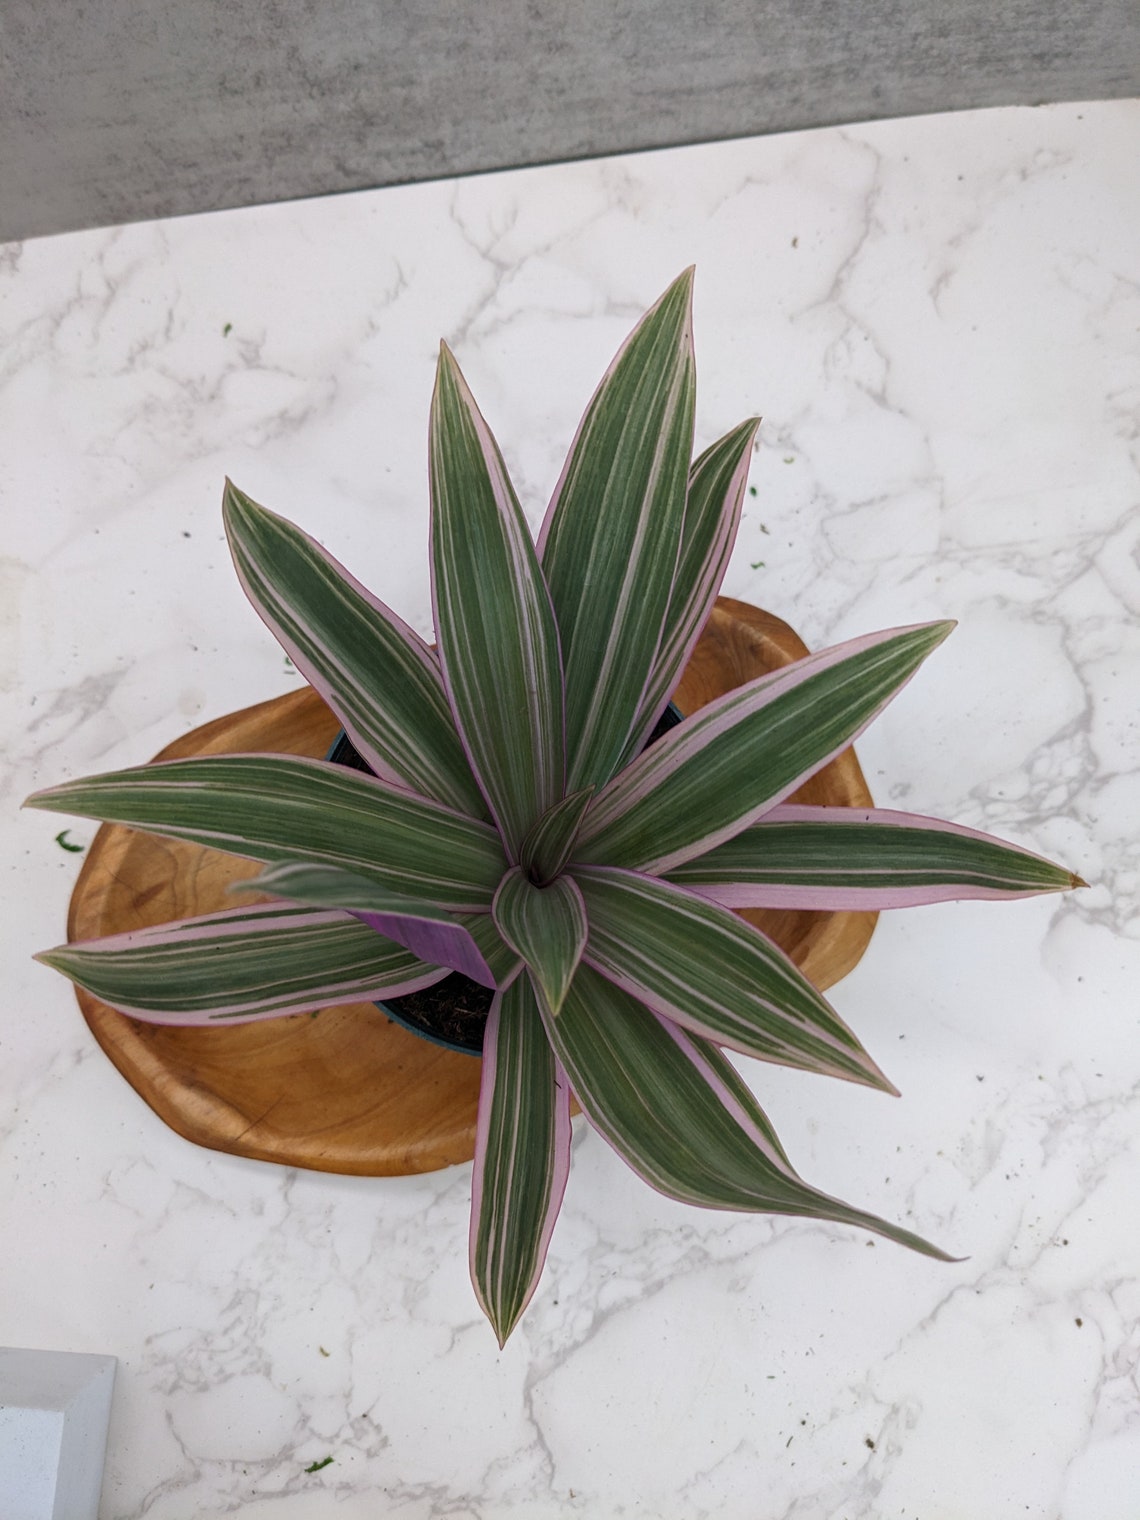 Buy Tricolor Tradescantia Rhoeo Spathacea Plant Online, Large Sword Shape Leaf Foliage  Indoor Houseplants or Outdoor Perennial Plant